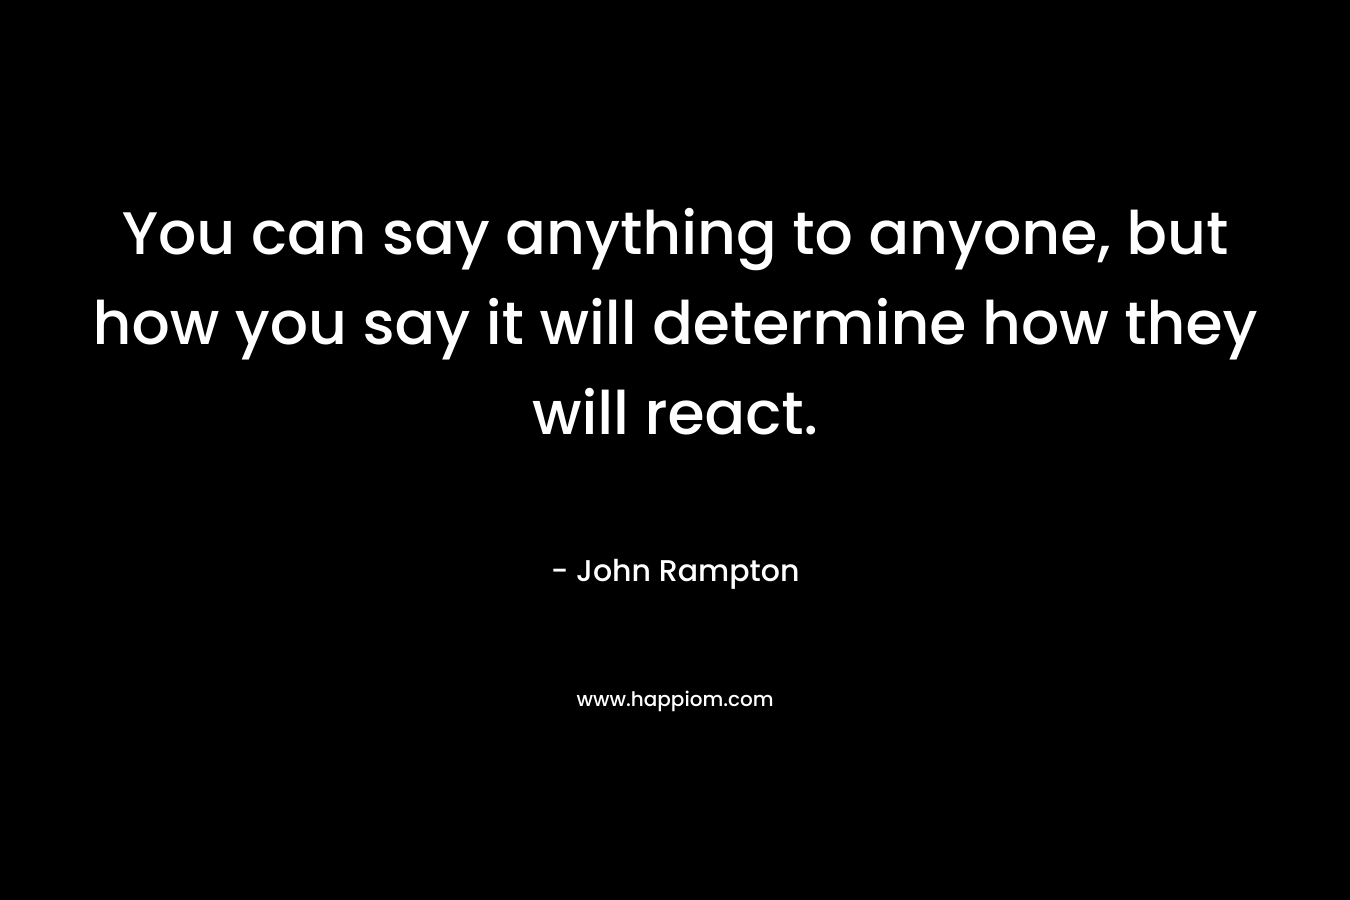 You can say anything to anyone, but how you say it will determine how they will react.